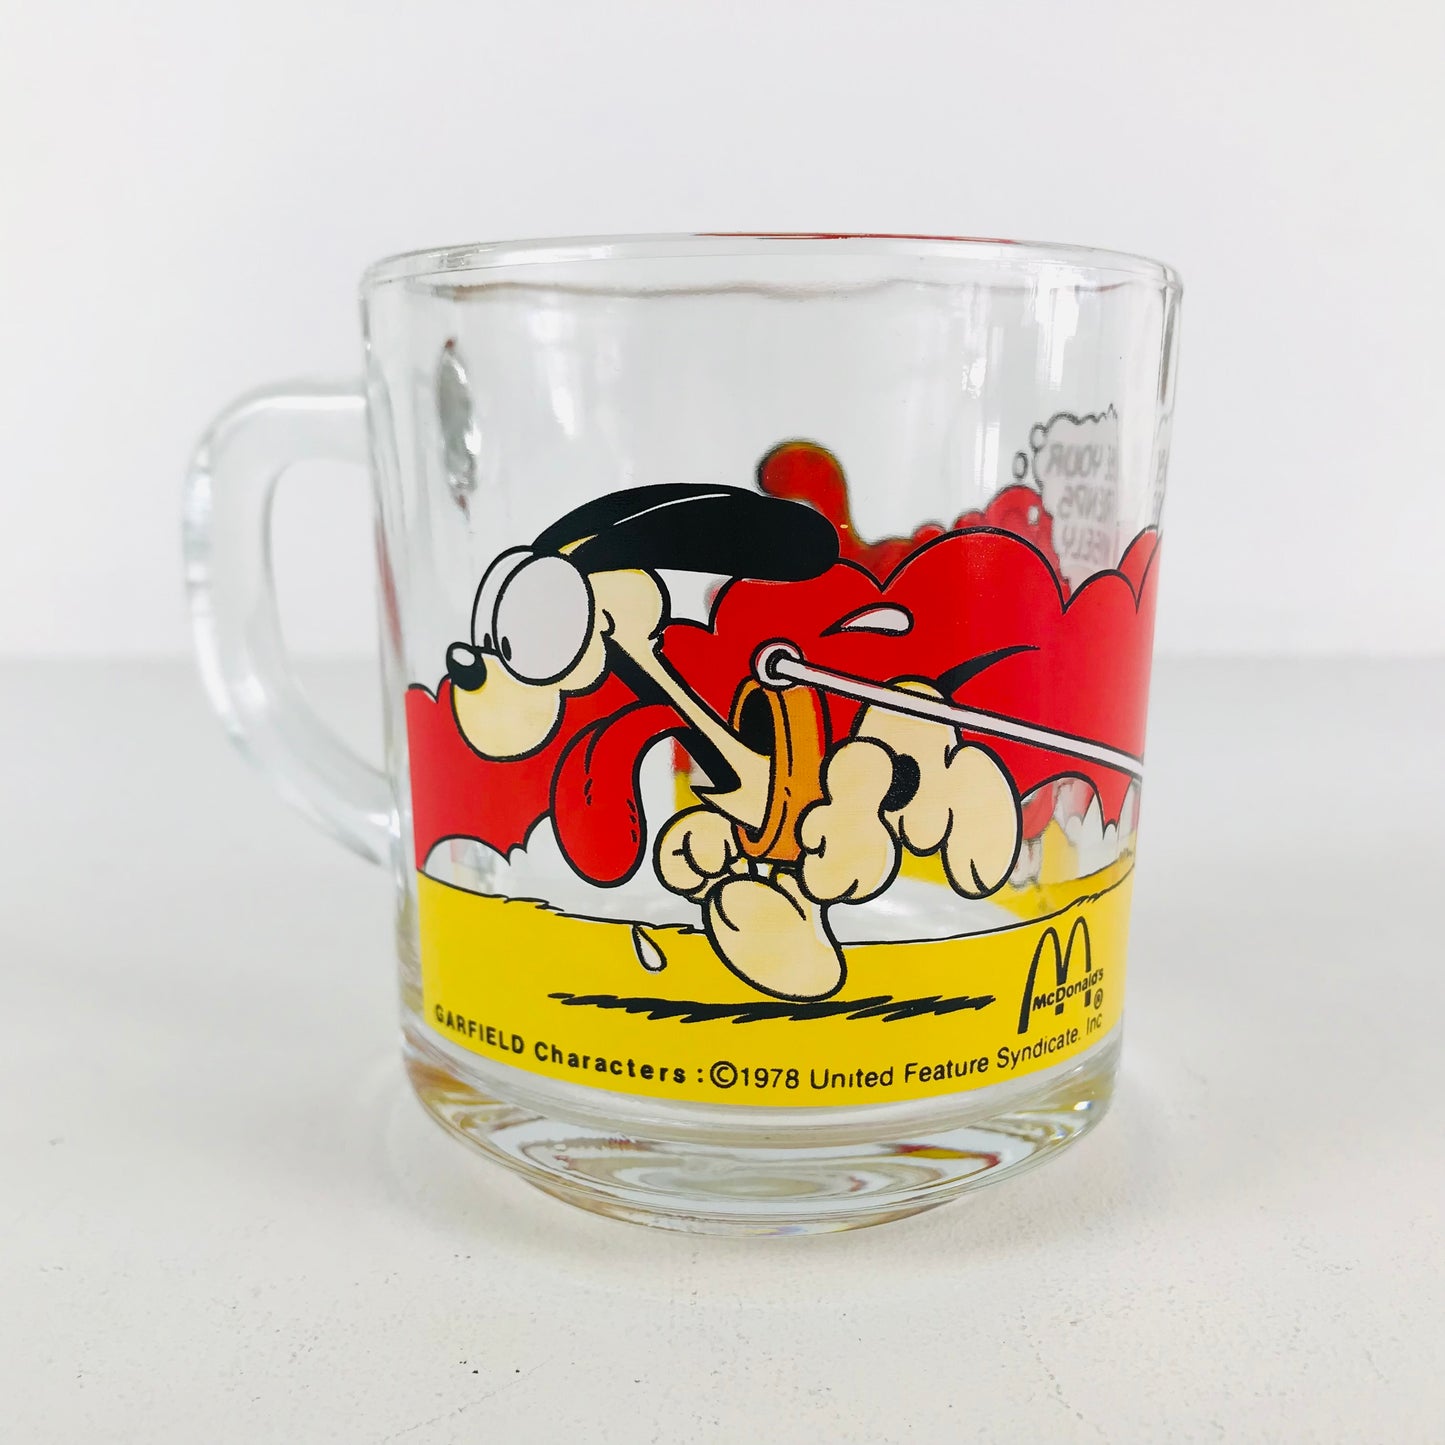 A 1980s McDonald's Garfield glass mug with a funny image of Odie tugging Garfield on a skateboard